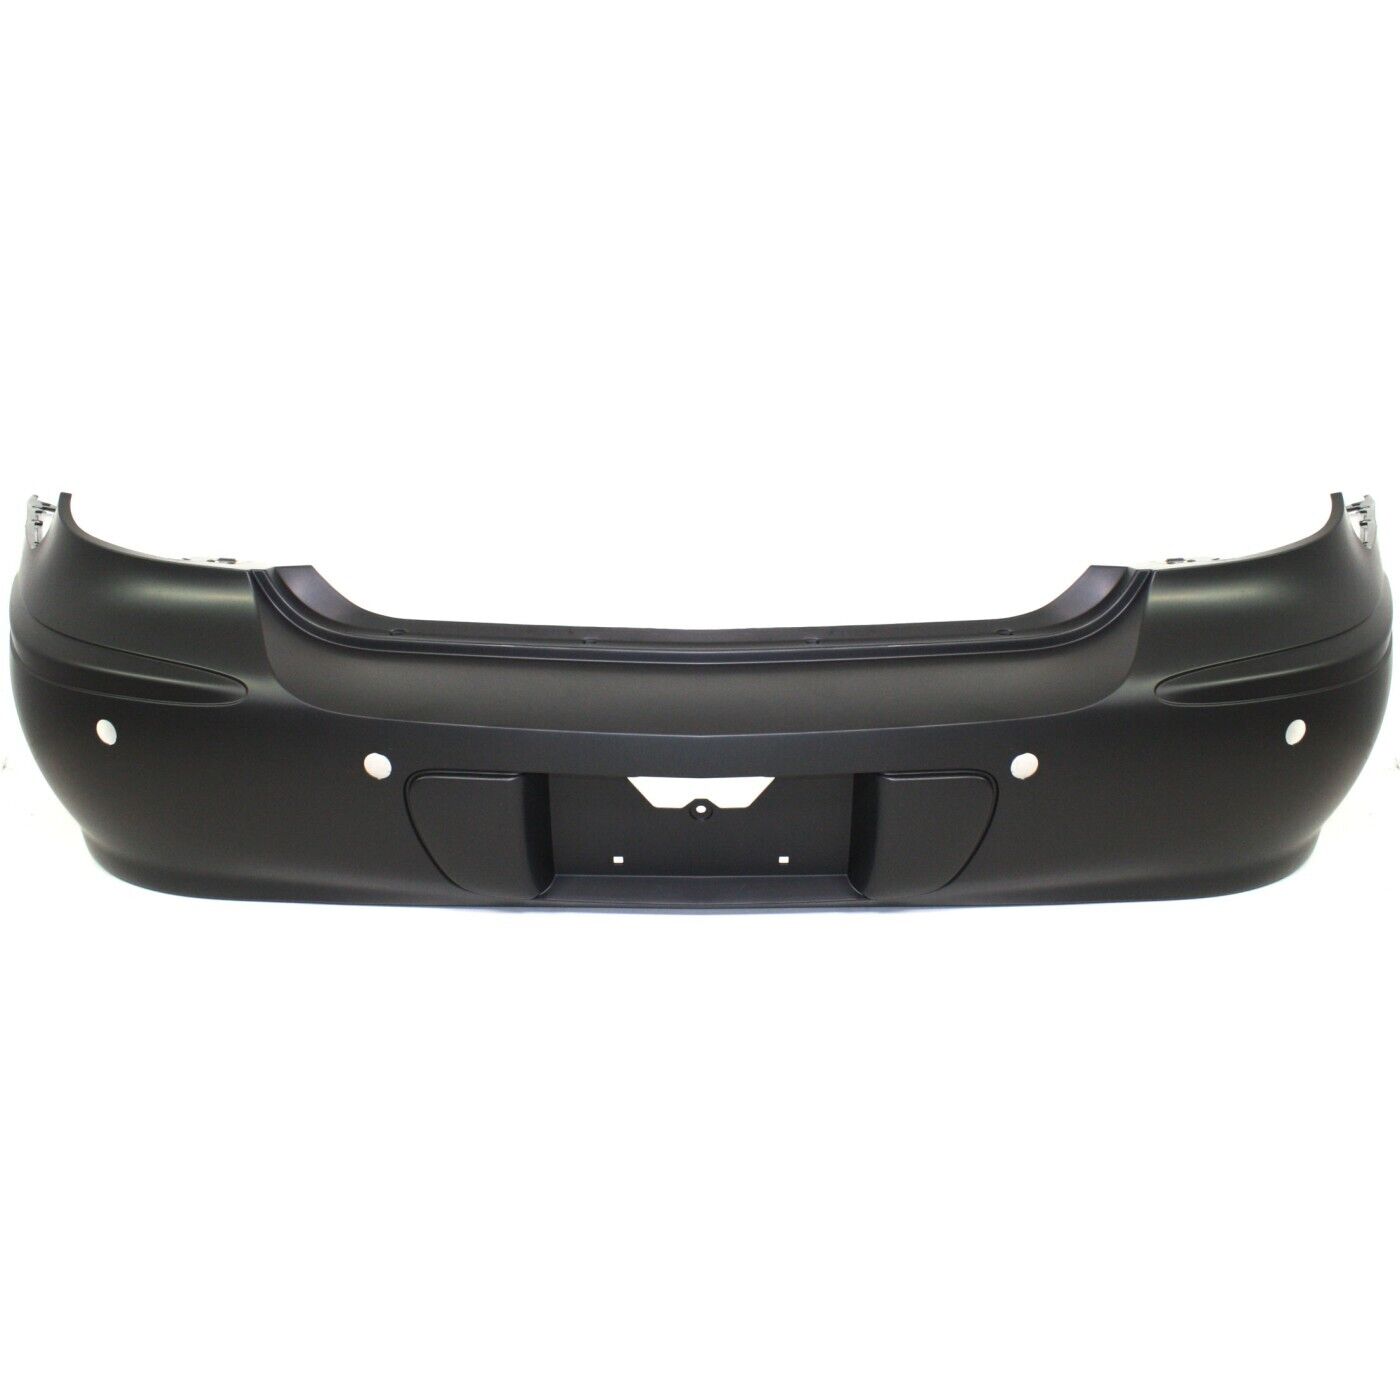 Bumper Cover For 2005-2007 Buick LaCrosse Rear Primed With Object Sensor Holes